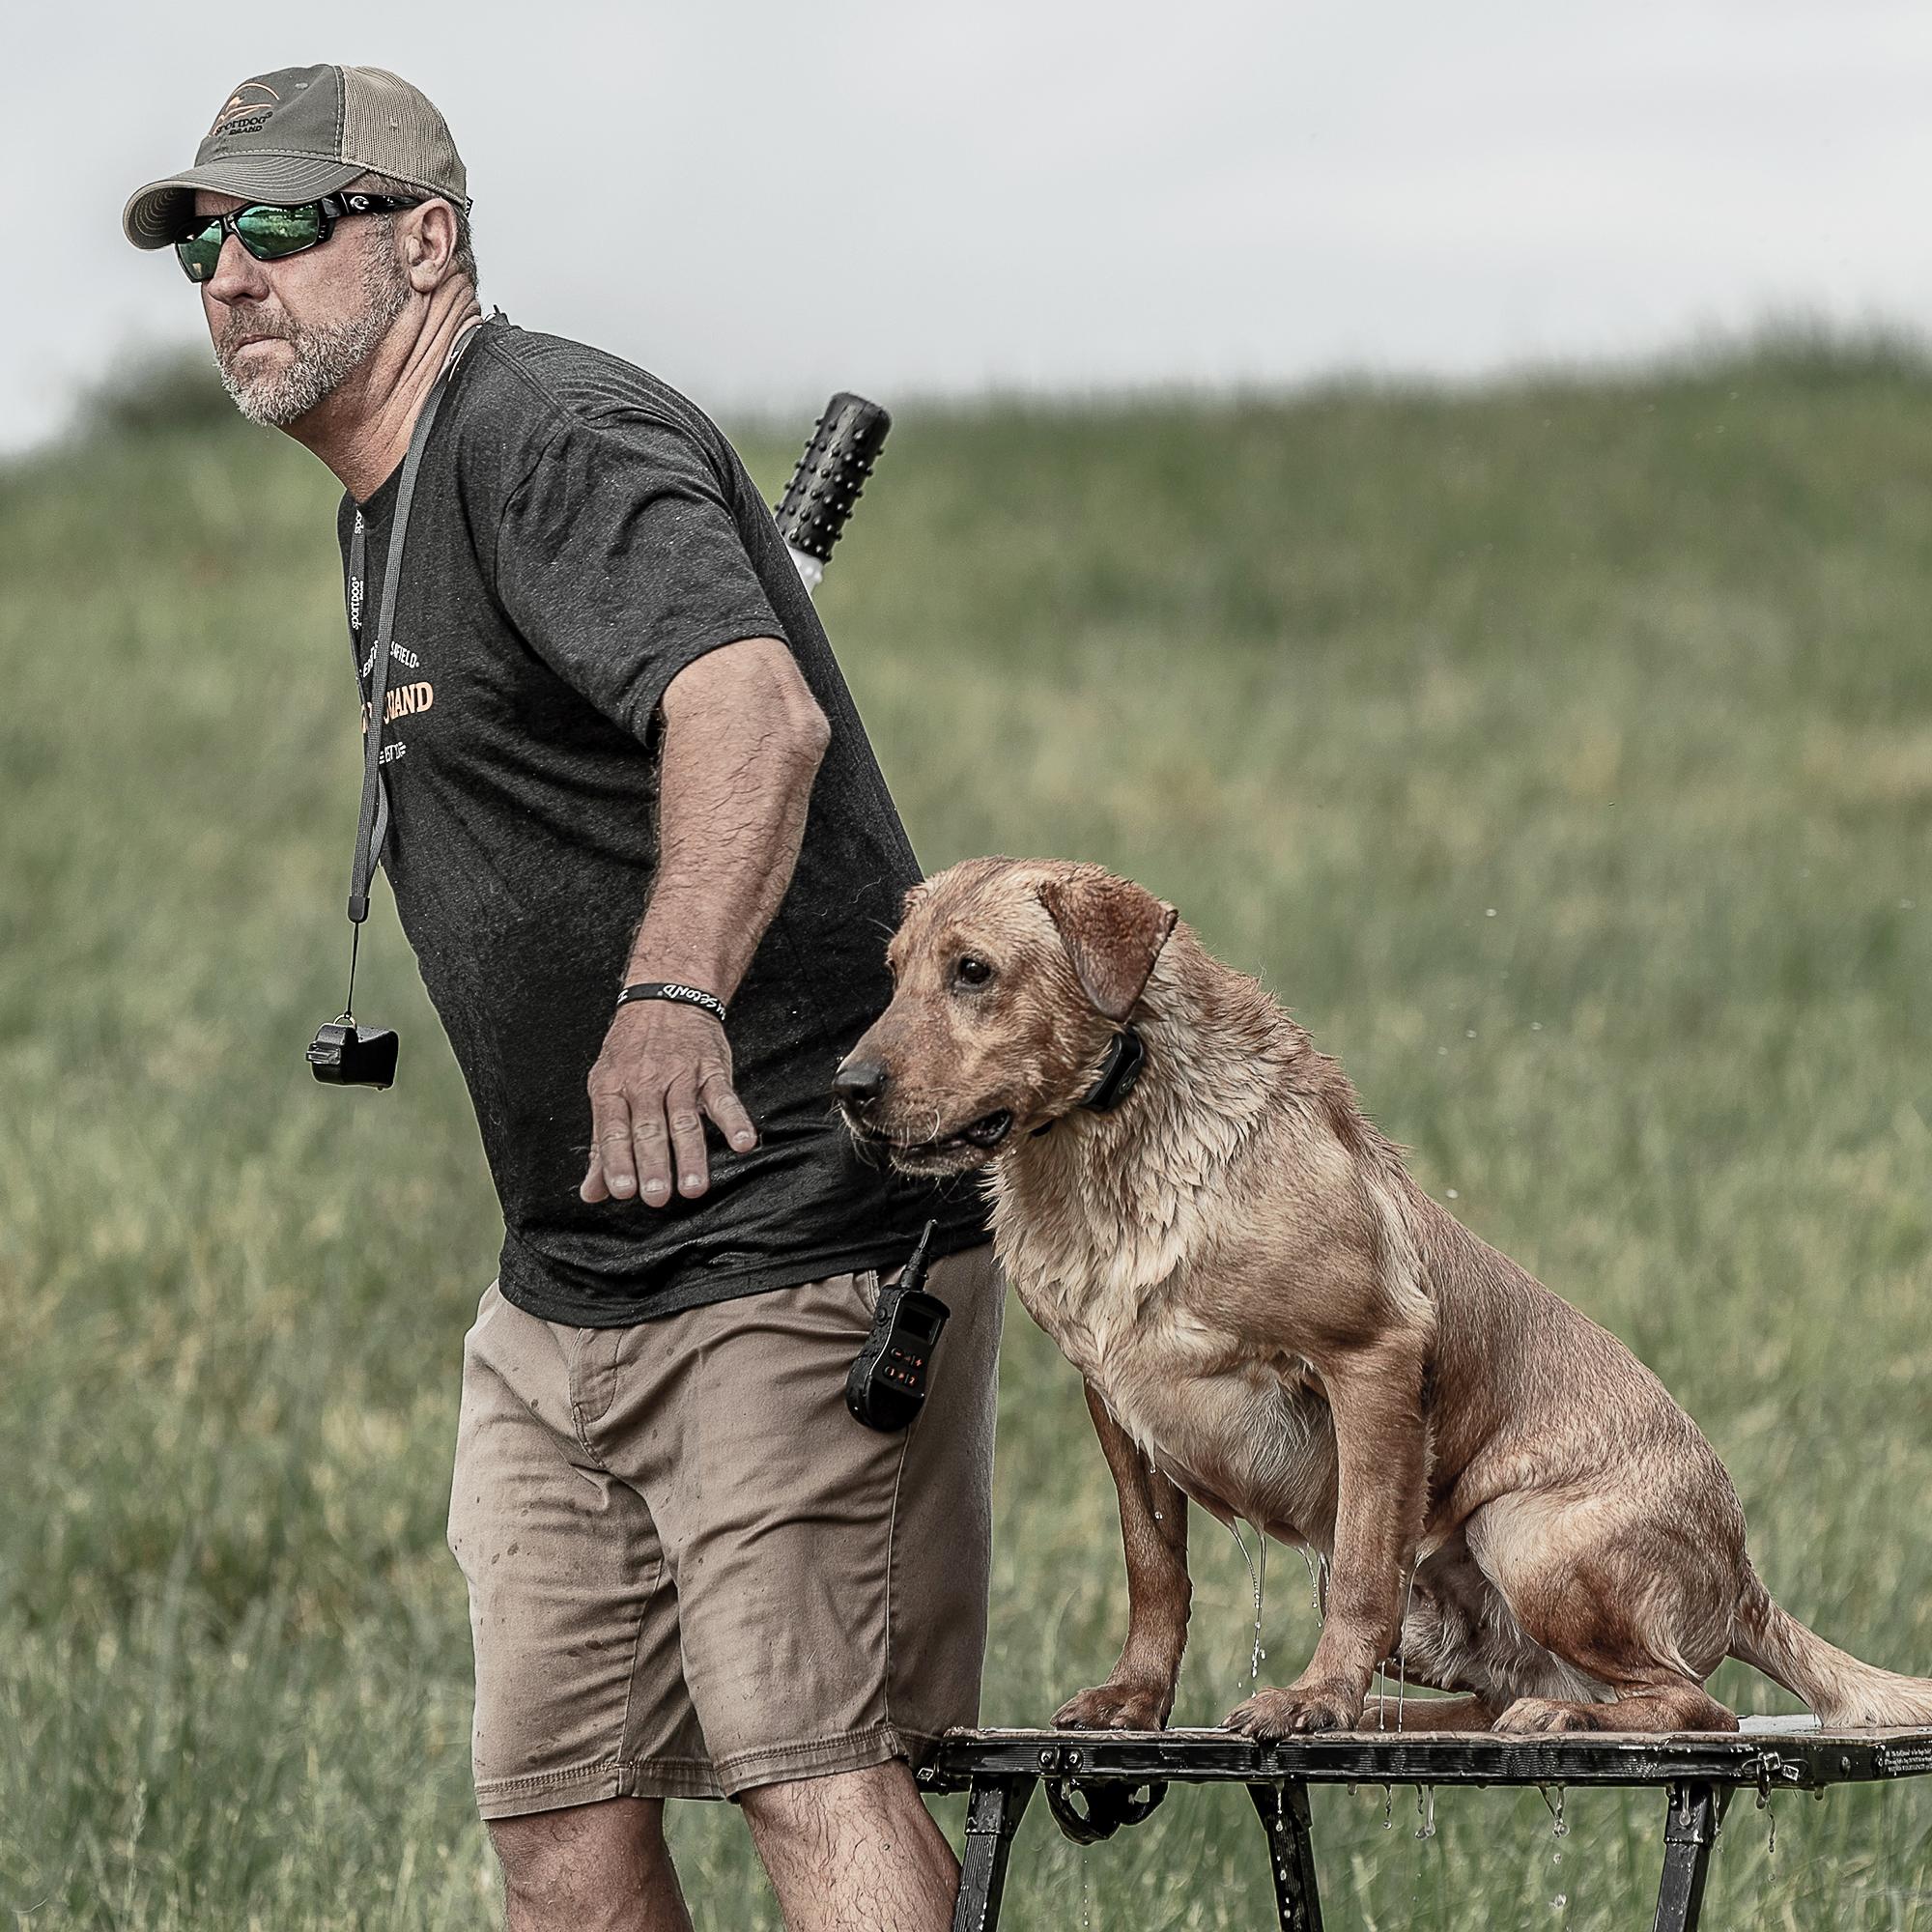 Chris has spent most of his life duck hunting or training in the field. Over the years, his program evolved into one of the most accomplished hunt test programs in the country. Webb Footed Kennels, Inc. has produced more than 350 Hunting Retriever Champions, 175 Master Hunters, and 35 Grand...